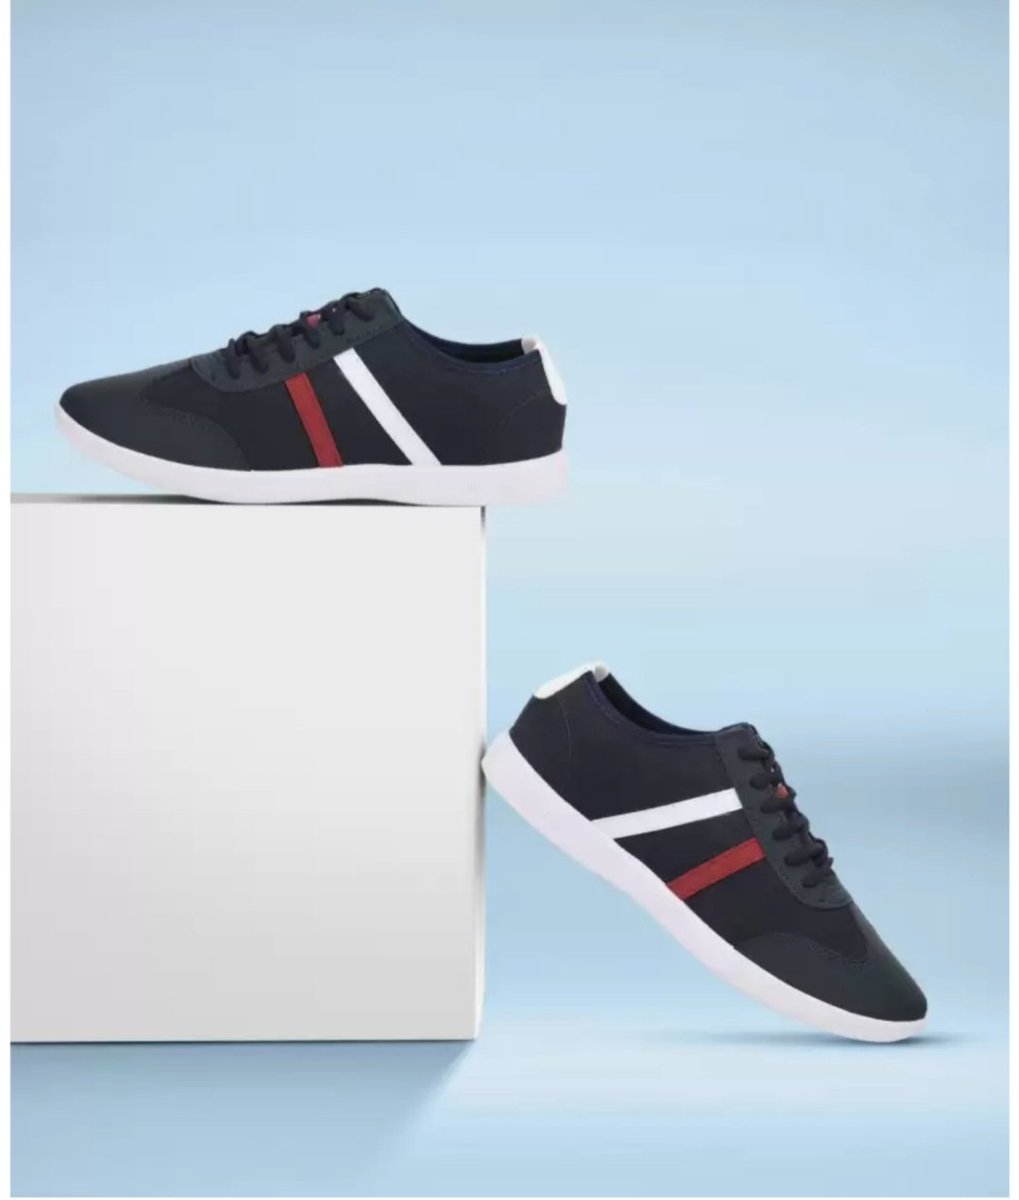 🔥Liberty Mens Sports Shoes From ₹389.

Link ➡️ fktr.in/Kmnv14n

#sportsshoes #shoes #t #casualshoes #sneakers #runningshoes #loafers #fashion #sports #mensshoes #formalshoes #boots #footwear #nikeshoes #sandals #nike #slippers #menswear #shoesformen #adidasoriginals #we